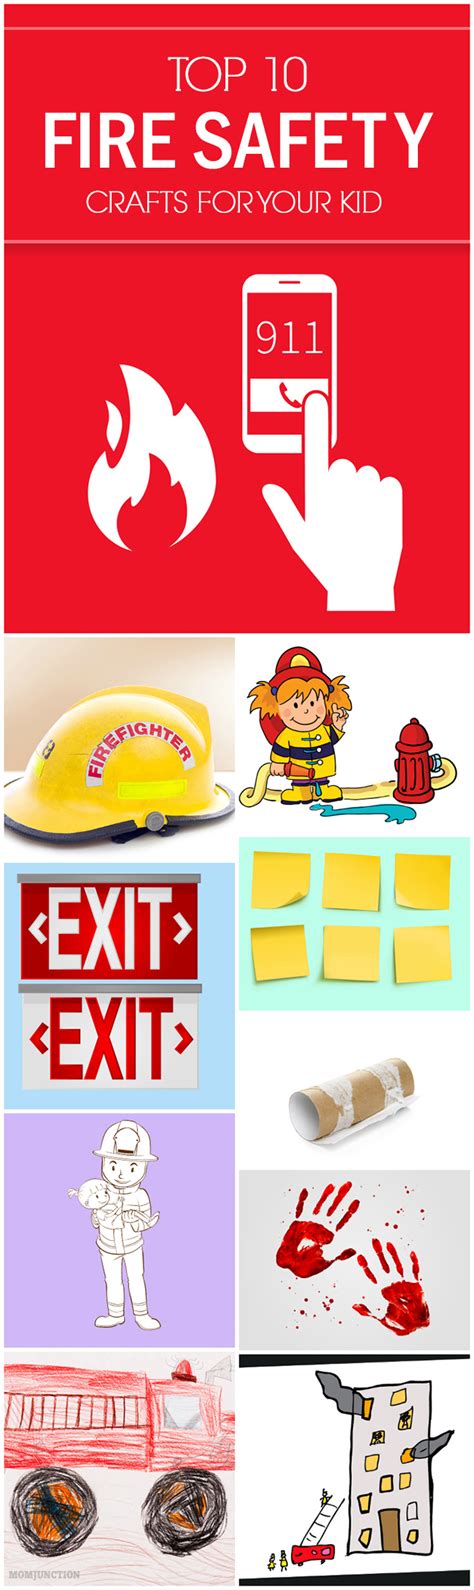 Top 10 Fire Safety Crafts For Preschoolers And Kids